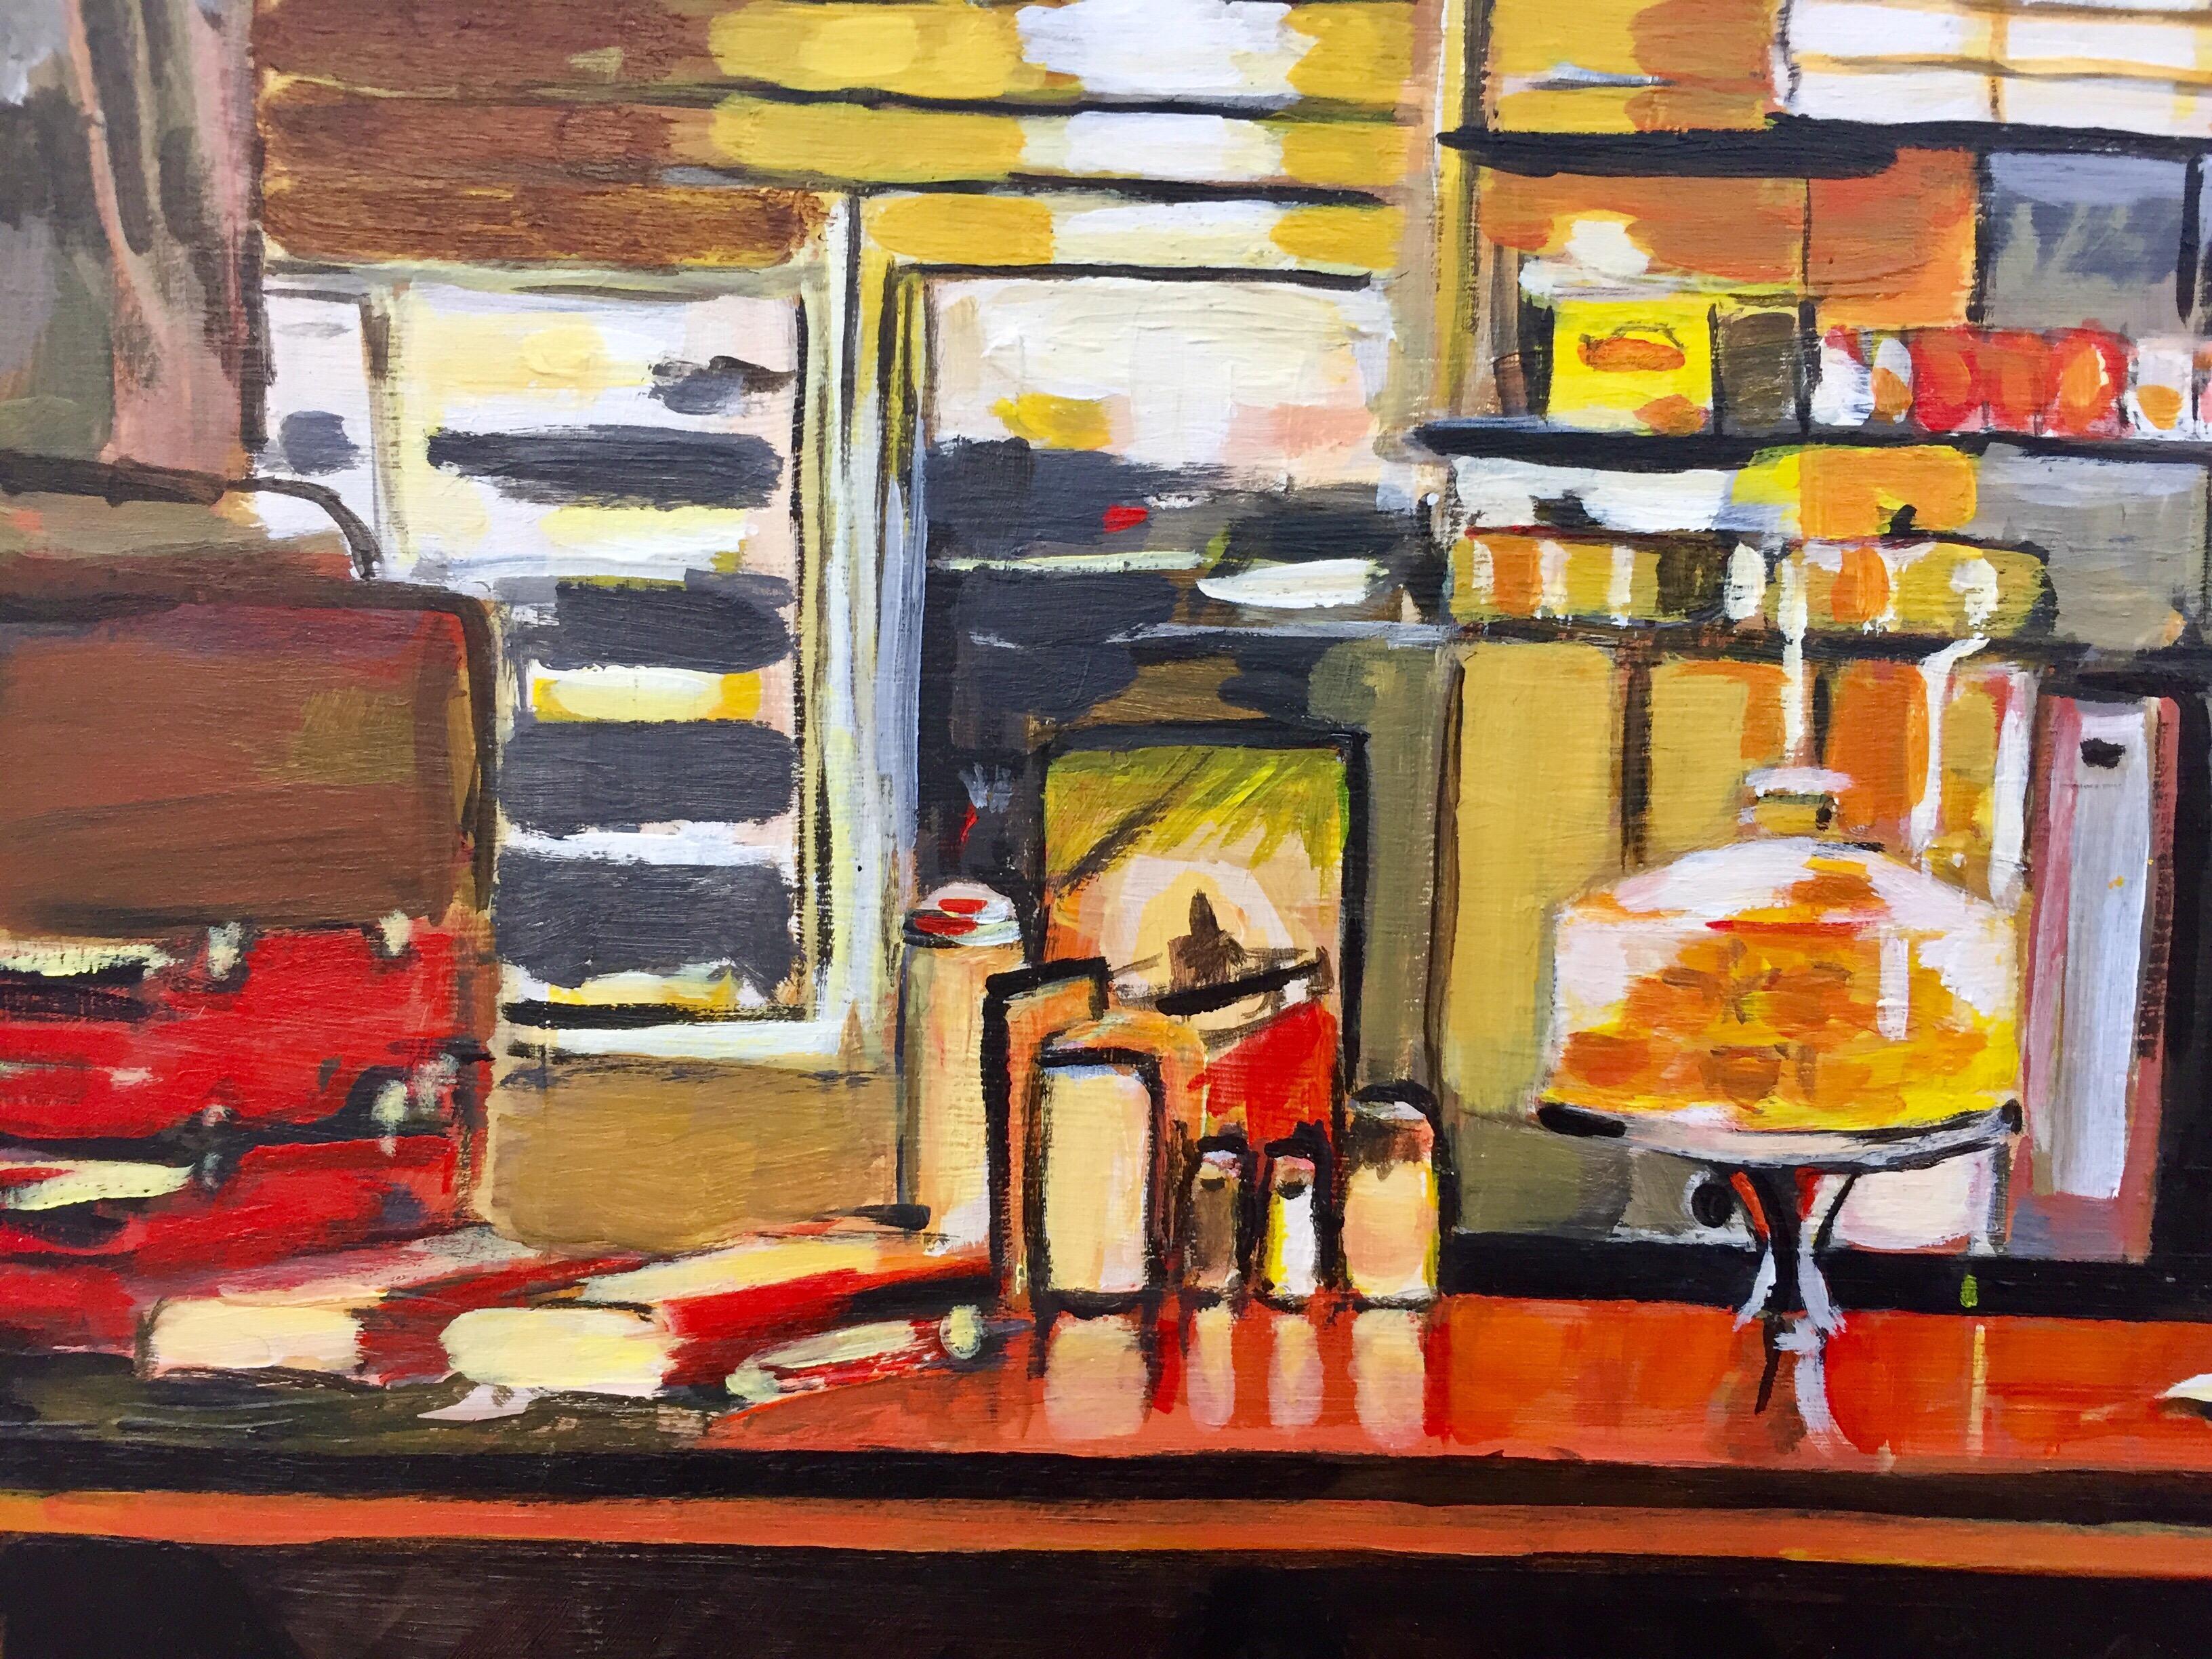 American Diner Still Life Painting by Leading British Urban Landscape Artist For Sale 1